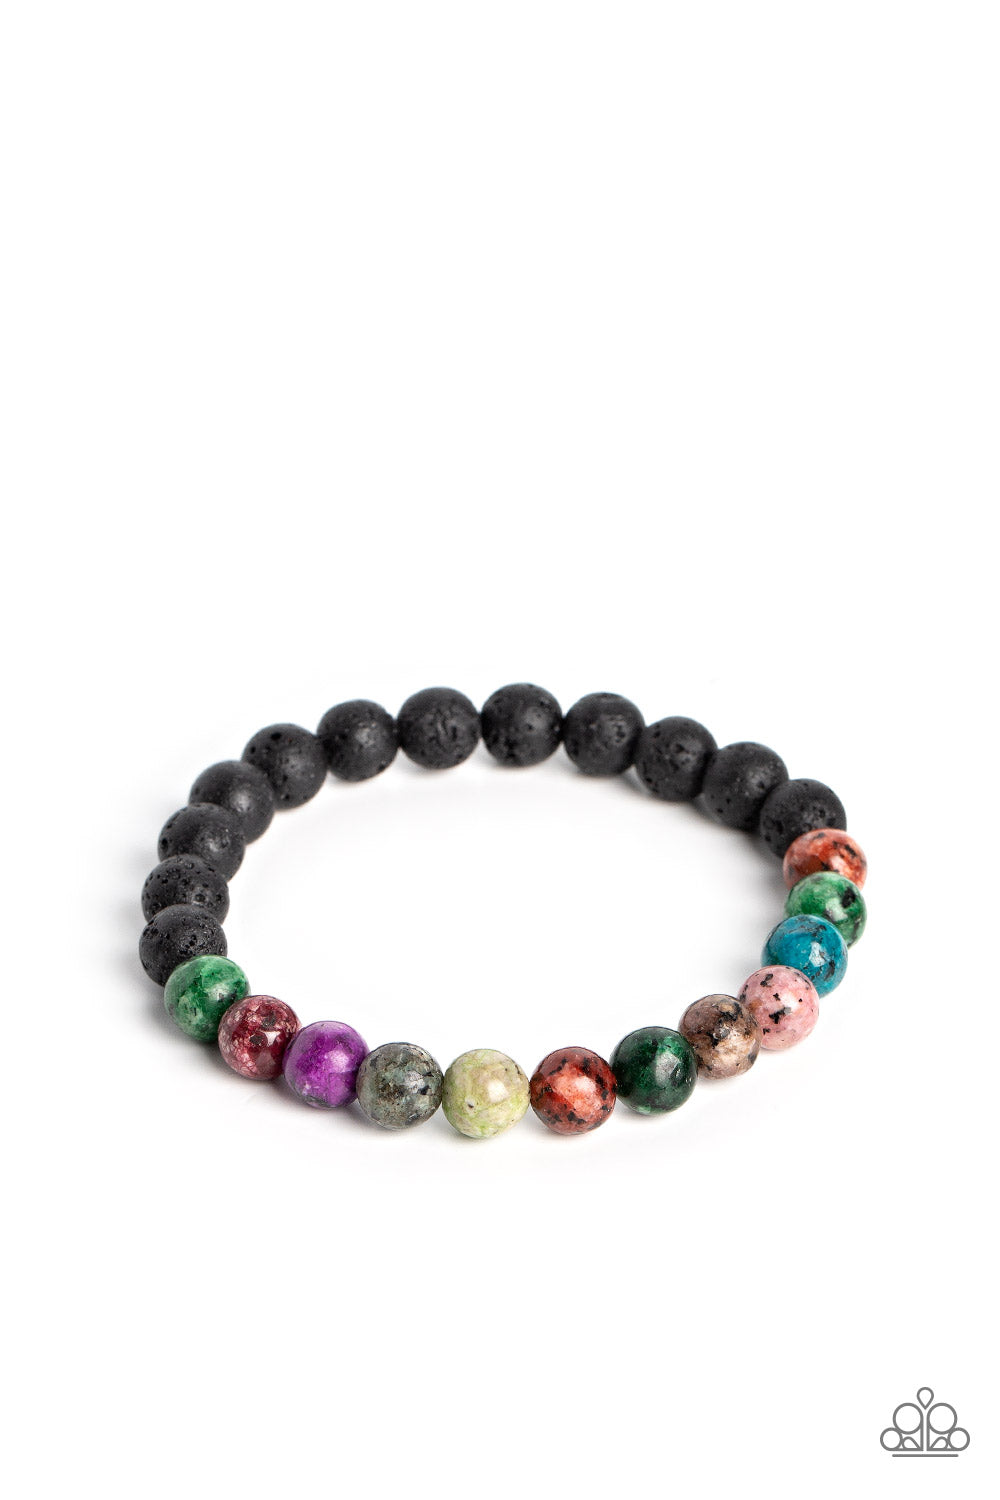 LAVA Language Multi Stretch Bracelet - Paparazzi Accessories  A collection of refreshing multicolored stone beads with speckled detailing, and earthy lava rock beads are threaded along a stretchy band around the wrist for an urban finish. As the stone elements in this piece are natural, some color variation is normal.  Sold as one individual bracelet.